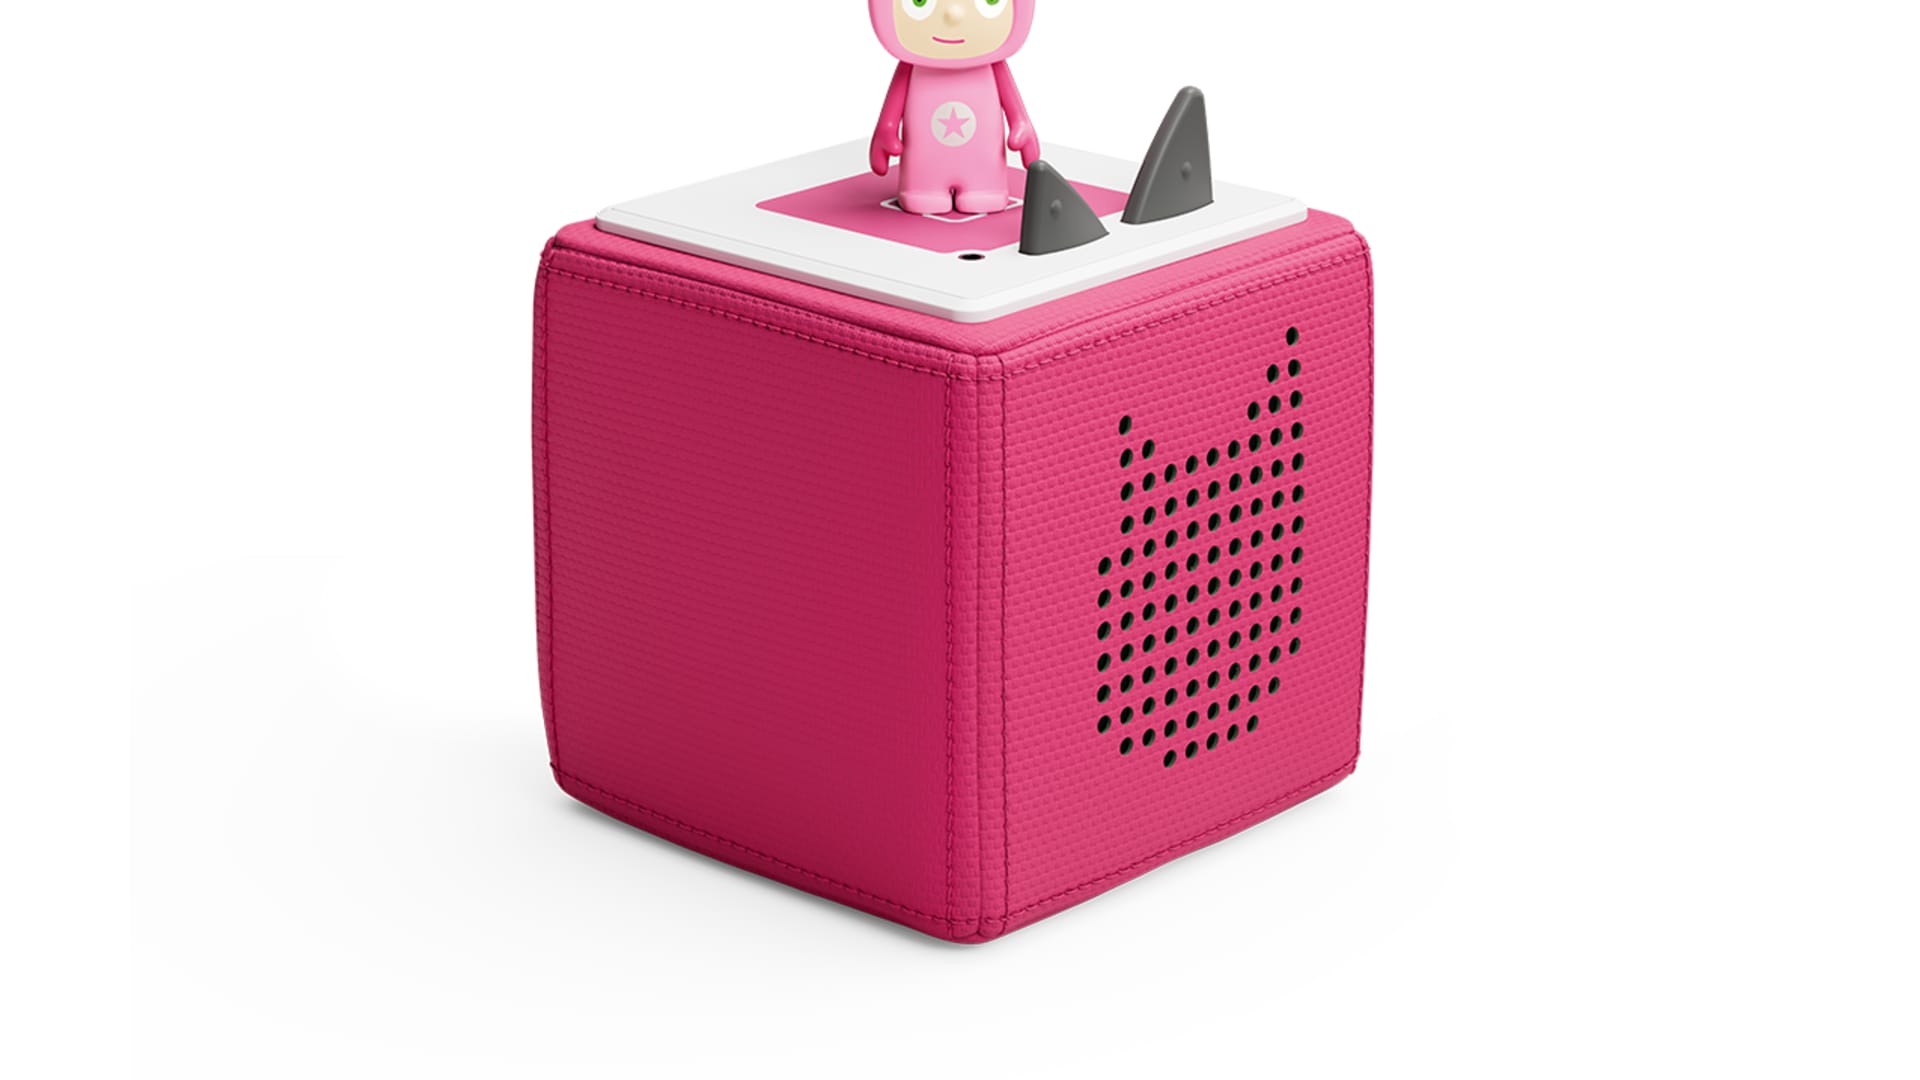 tonies® I Toniebox in pink with Creative-Tonie I Buy now